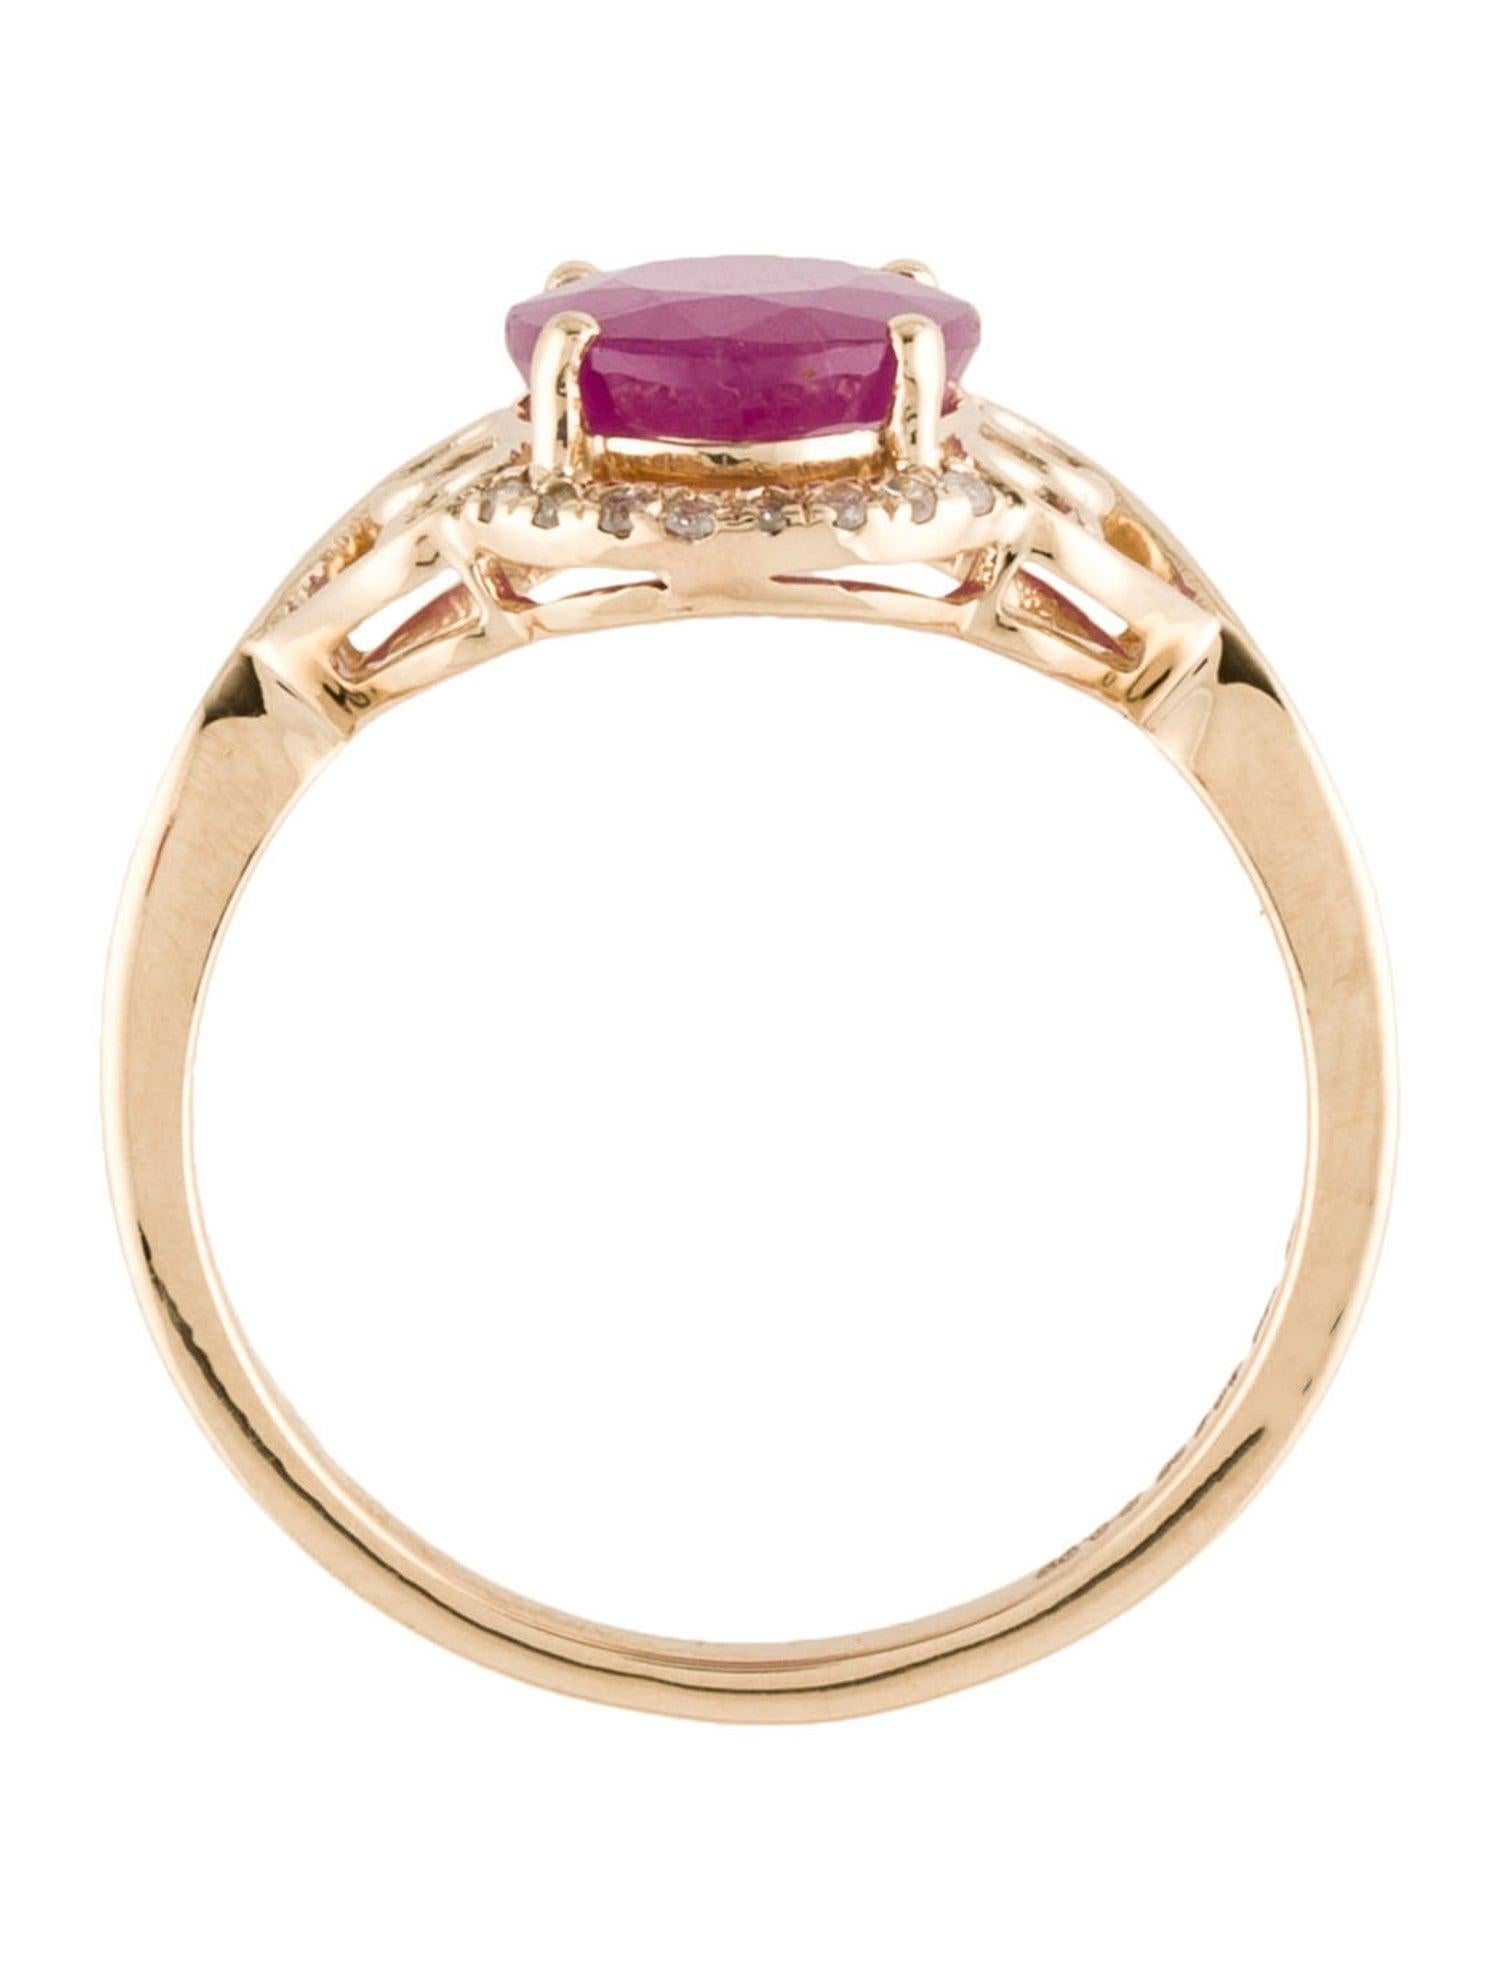 Gorgeous 14K Ruby & Diamond Cluster Cocktail Ring - 2.56ct Gemstones - Size 8 In New Condition For Sale In Holtsville, NY